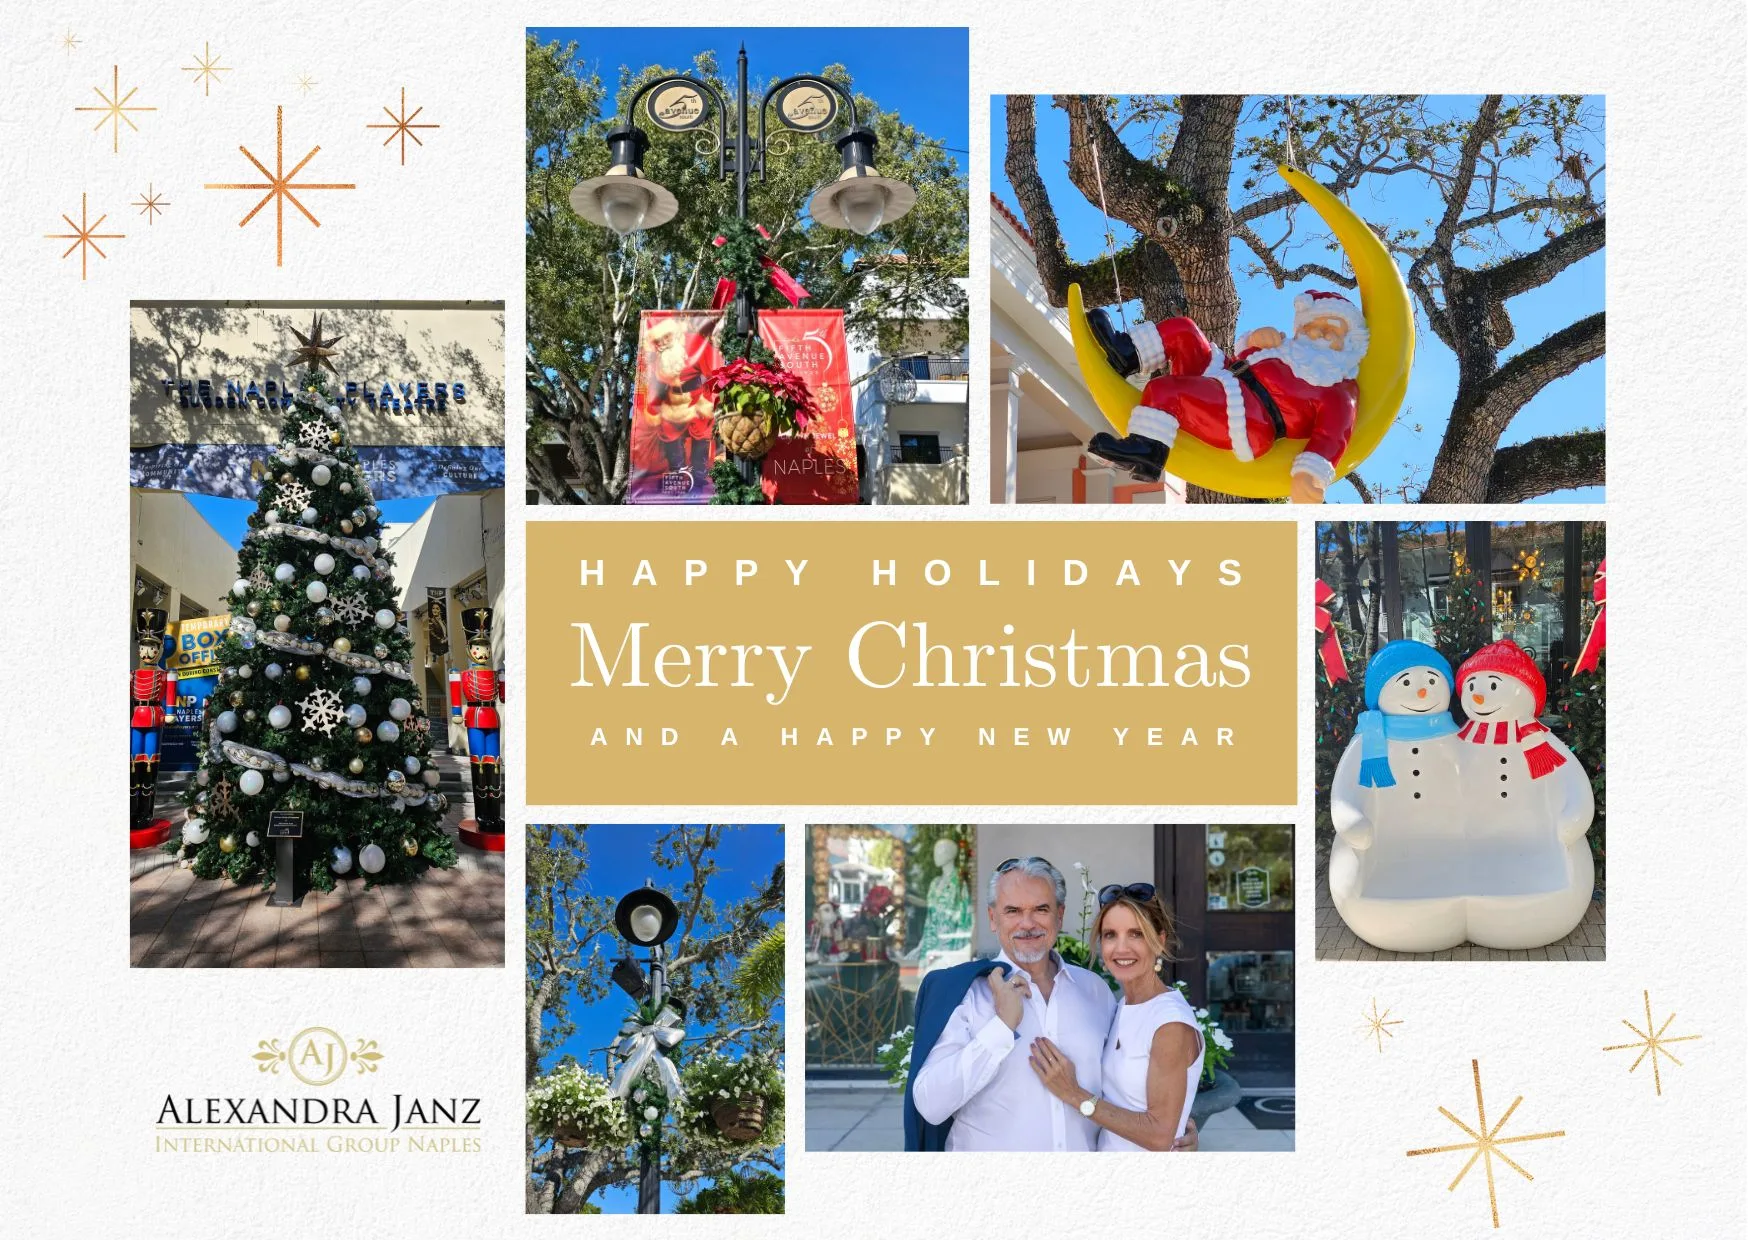 Christmas Card with Pictures from Naples, Florida 5th Ave S and 3rd Street